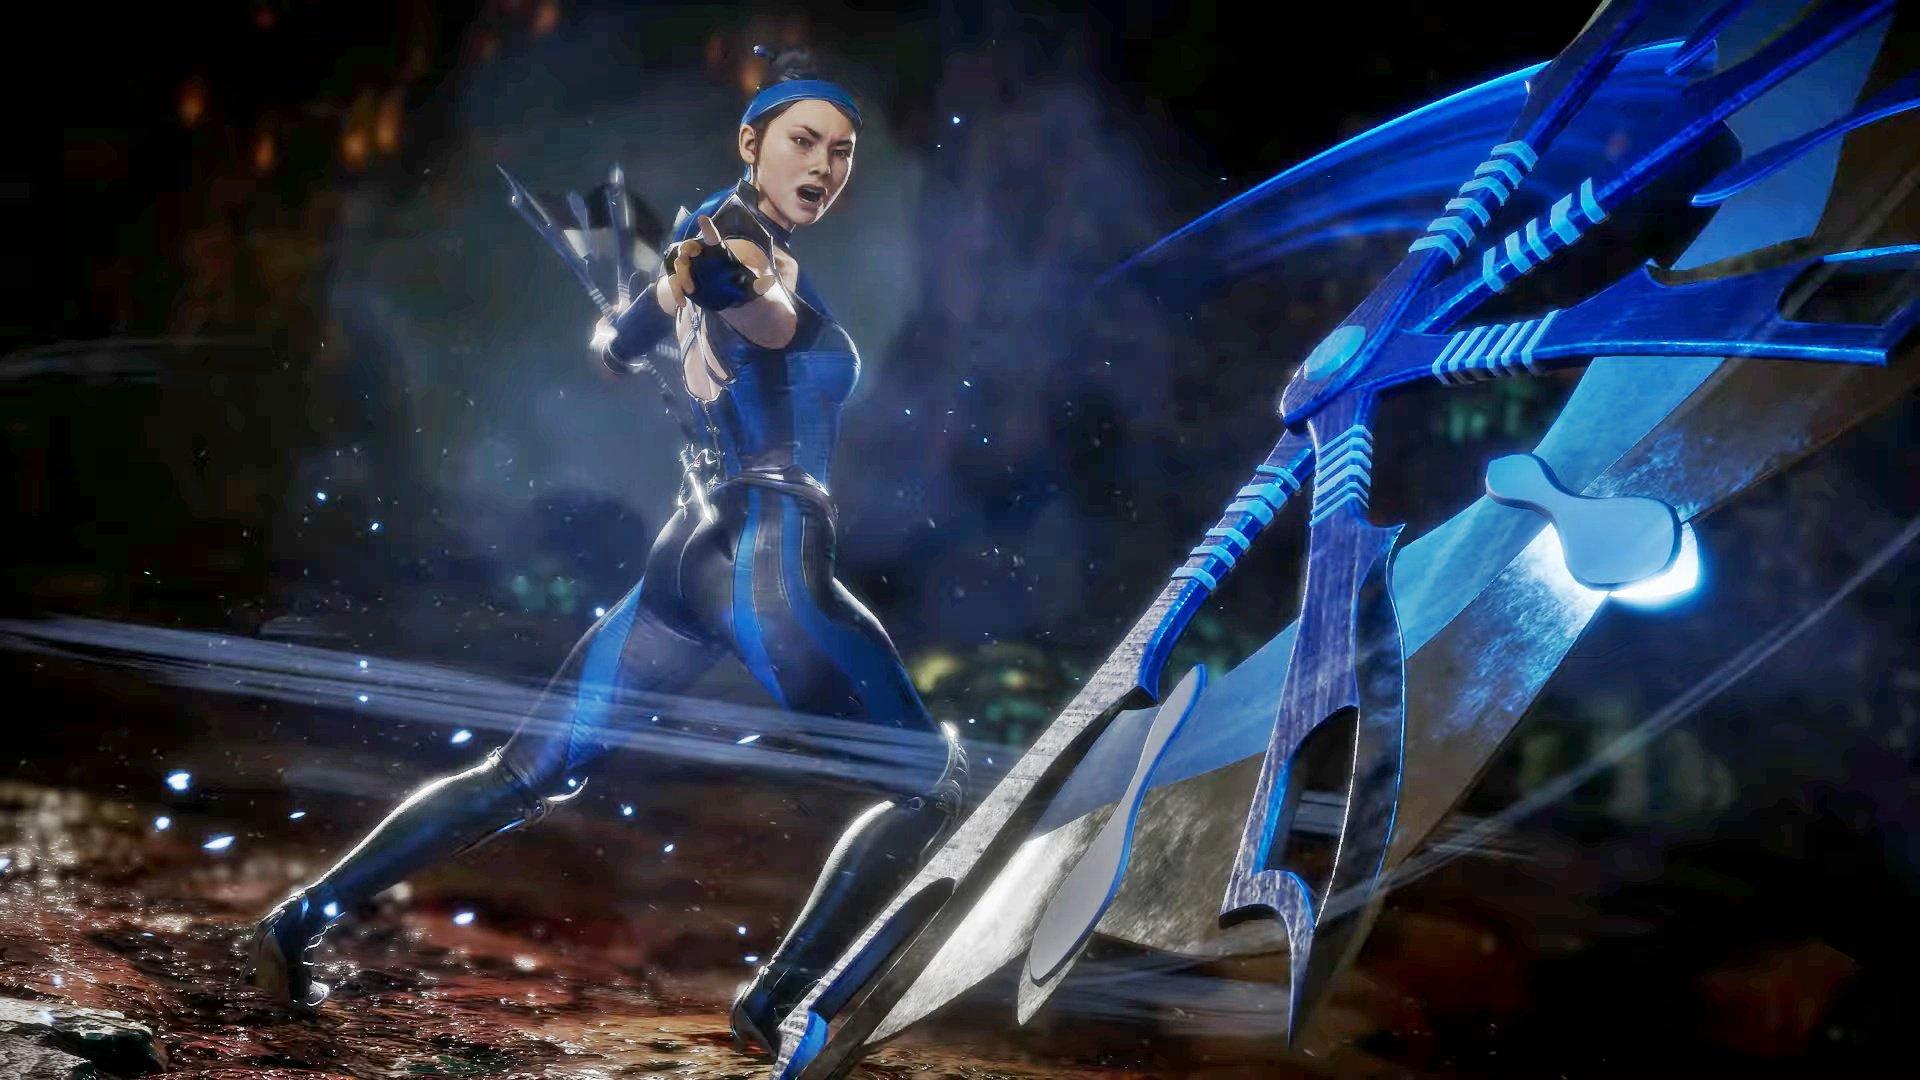 Kitana Graces Us With Her Presence In The Latest Mortal Kombat 11